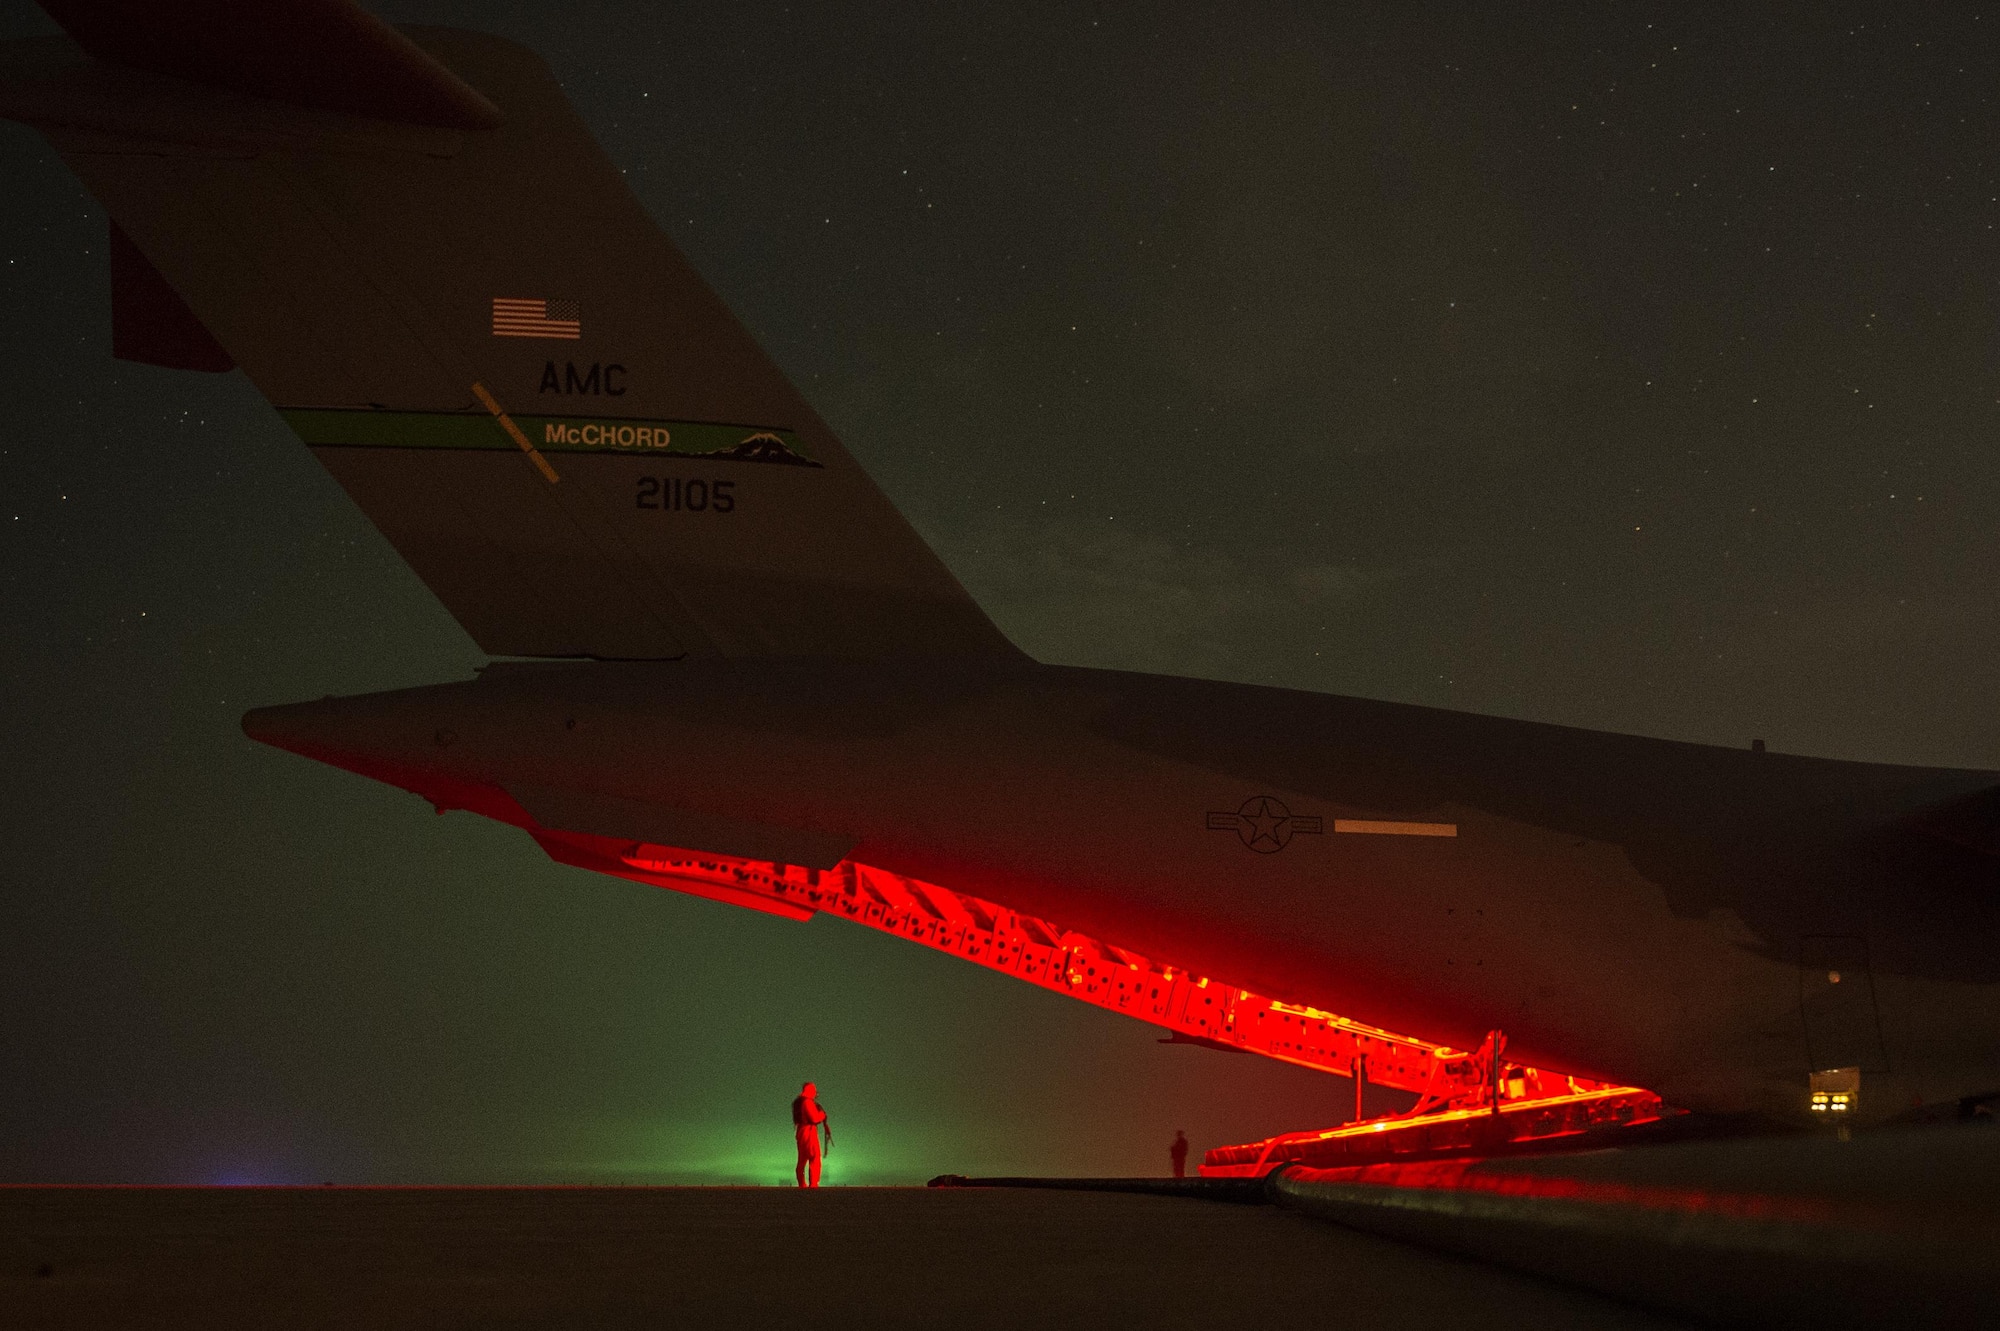 U.S. Air Force Airmen deliver fuel to coalition bases in Iraq in support of Operation Inherent Resolve, Dec. 16, 2015. OIR is the coalition intervention against the Islamic State of Iraq and the Levant. (U.S. Air Force photo by Tech. Sgt. Nathan Lipscomb)